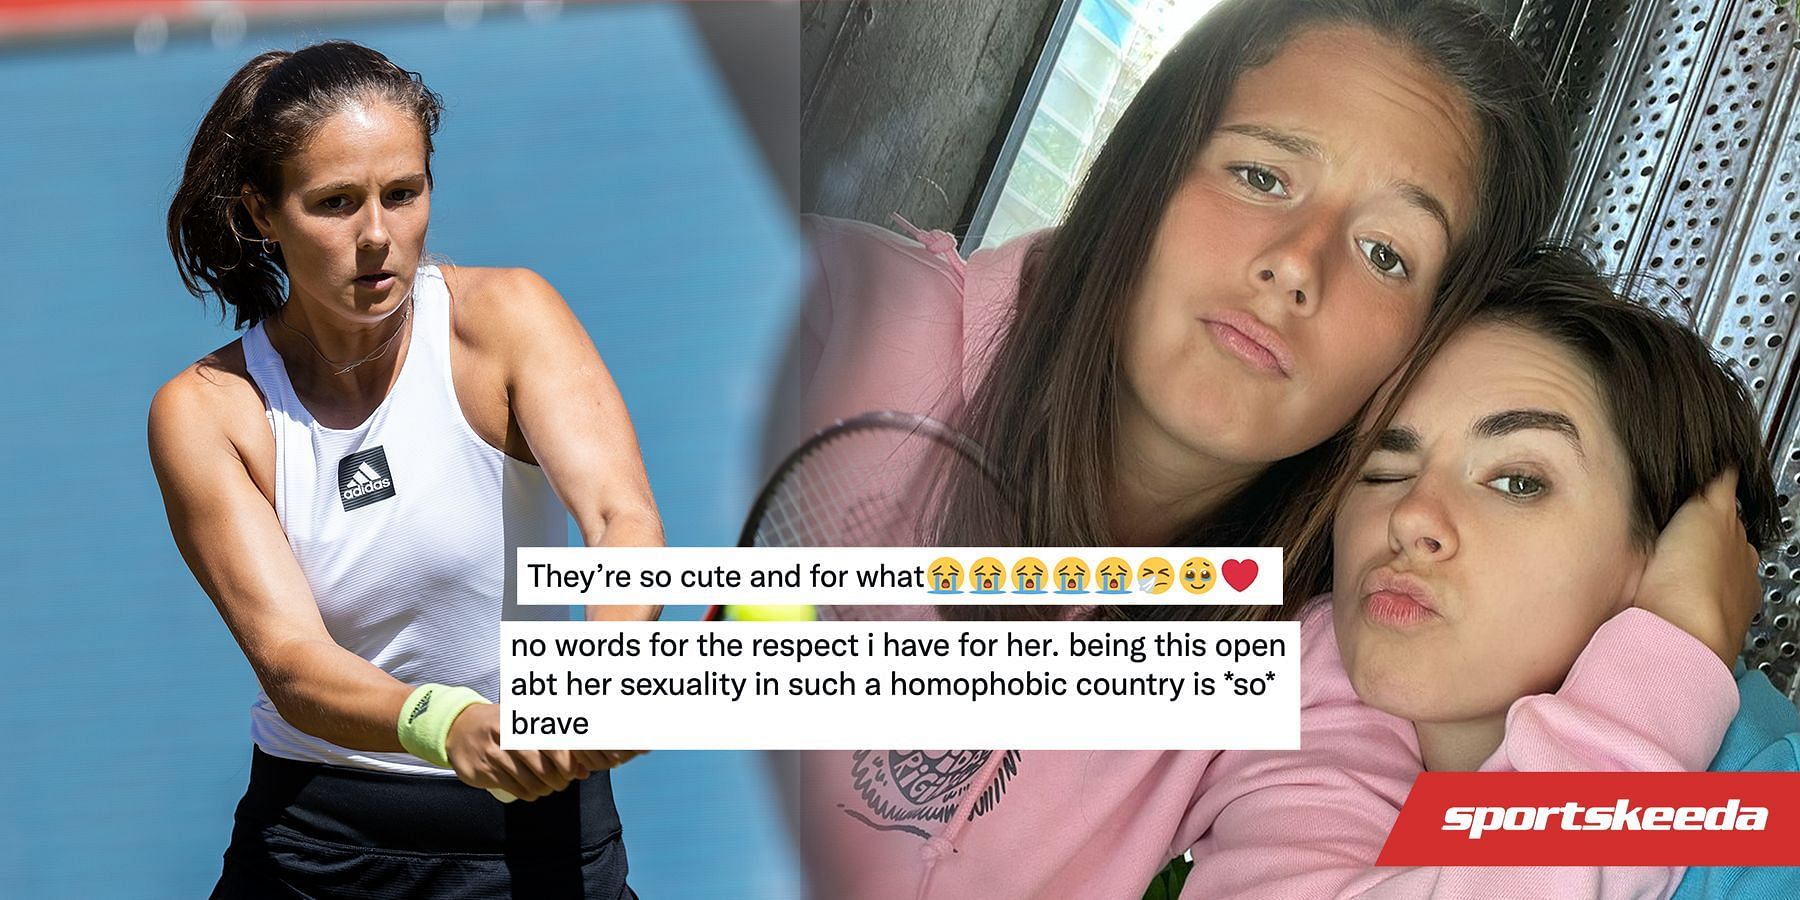 Daria Kasatkina shared a photograph with her girlfriend on social media.